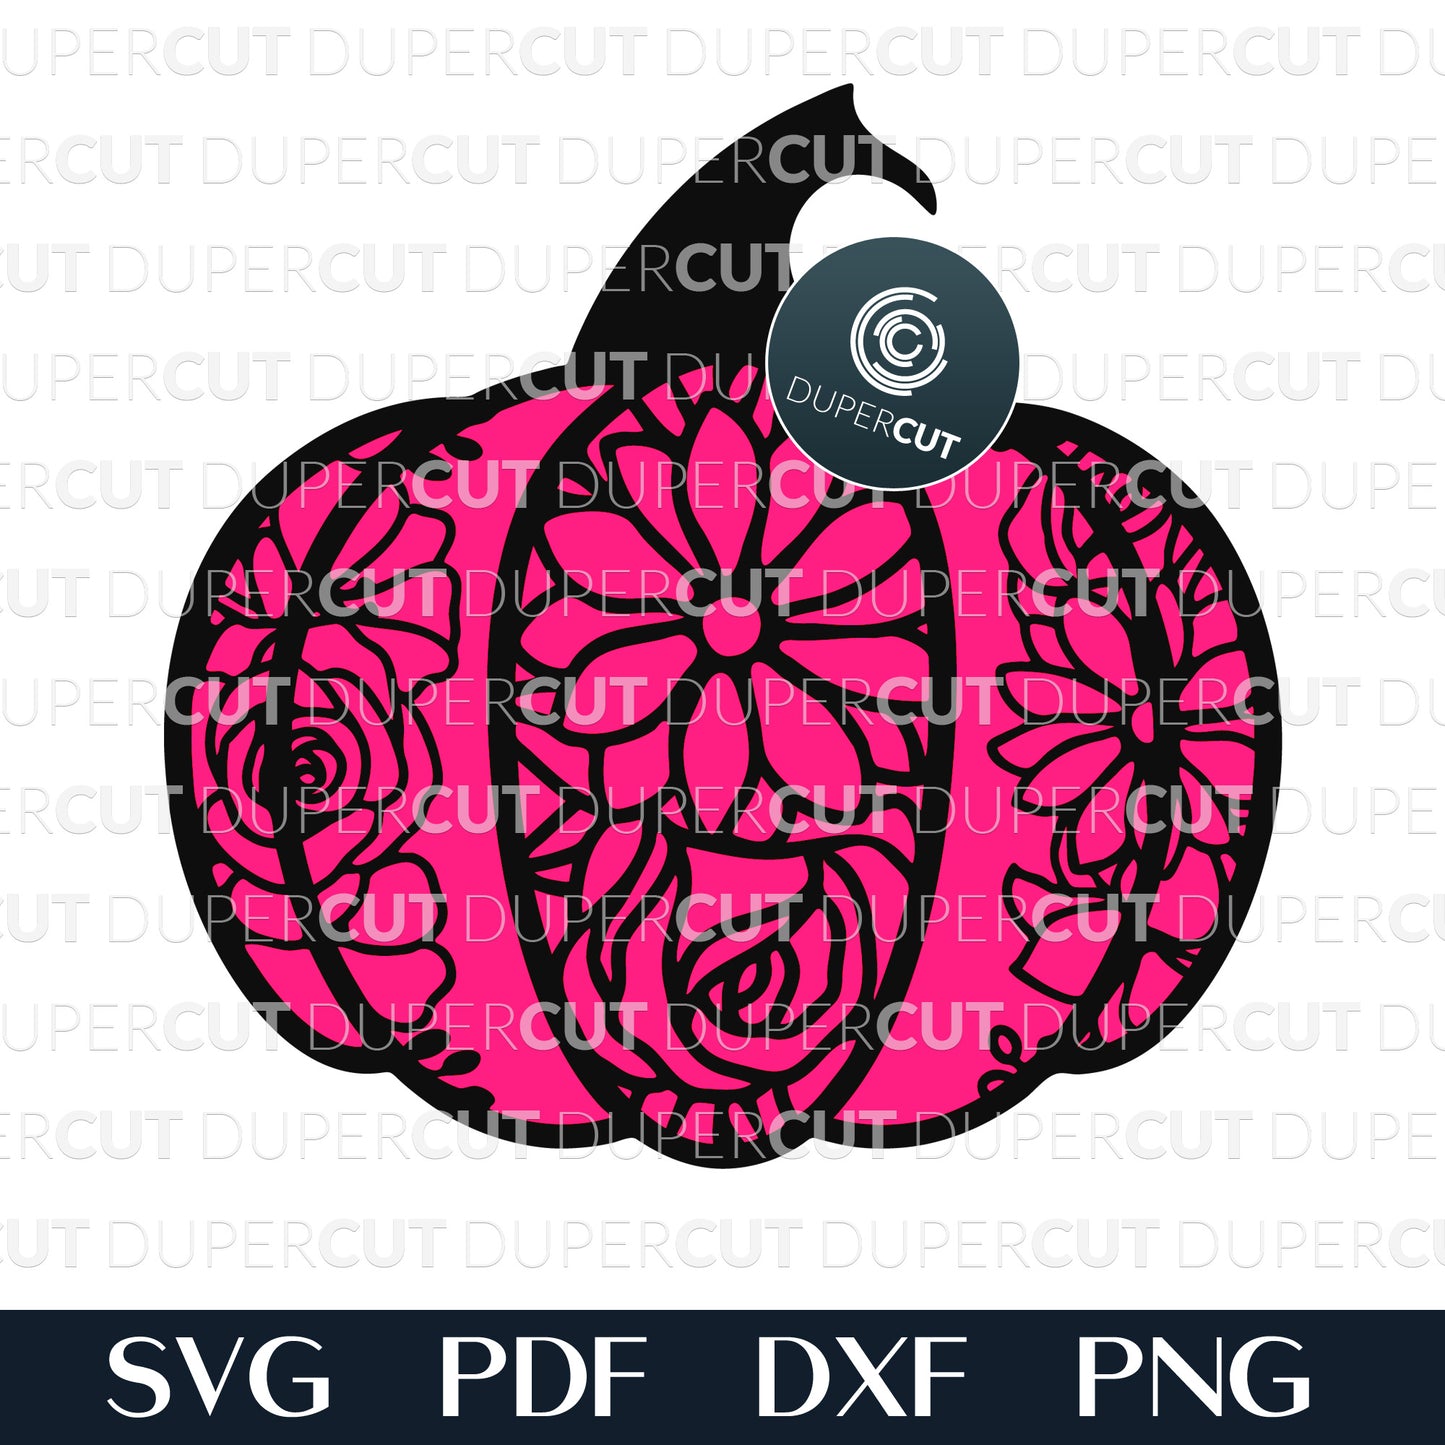 Pumpkin with flower pattern SVG PNG DXF paper cutting files for Glowforge, Cricut, Silhouette, laser CNC machines by DuperCut 